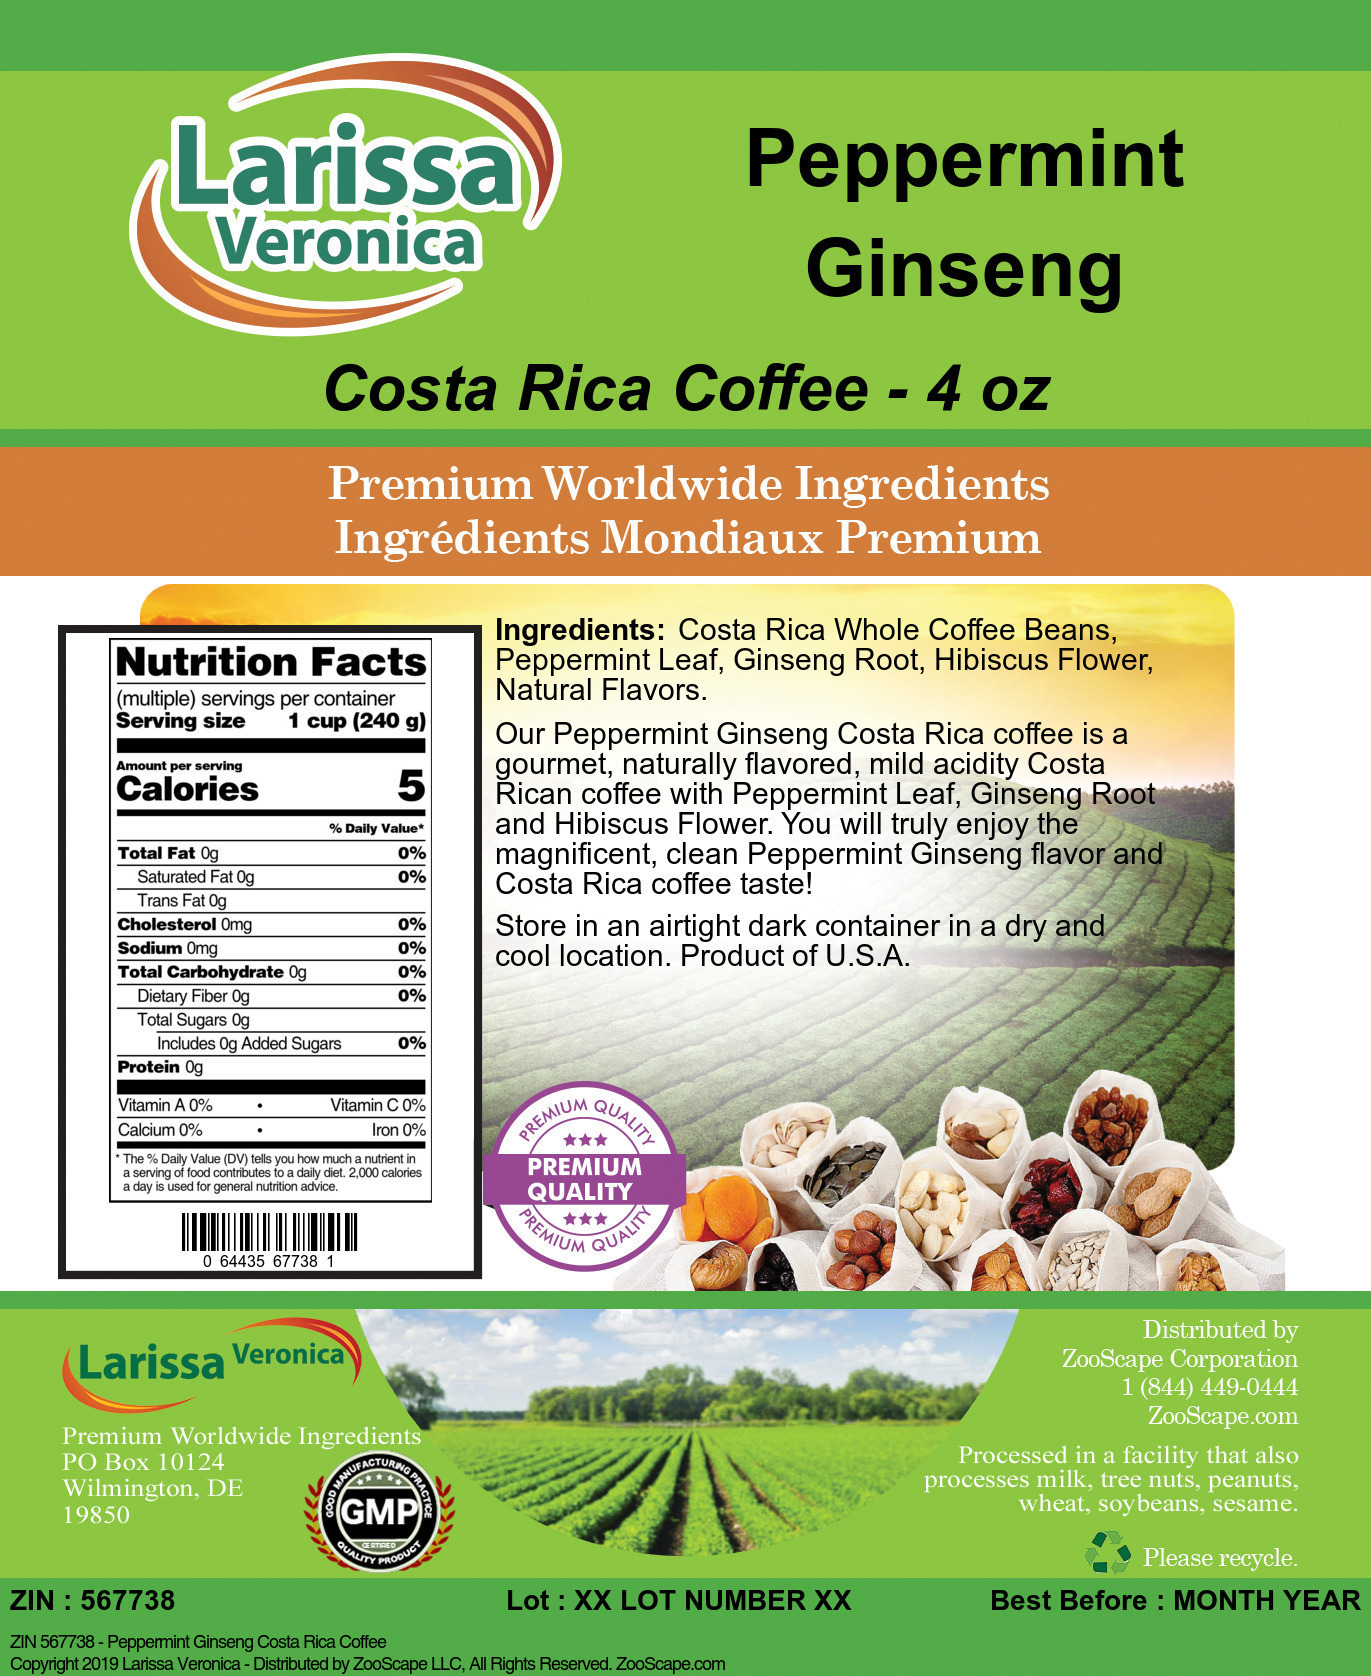 Peppermint Ginseng Costa Rica Coffee - Label